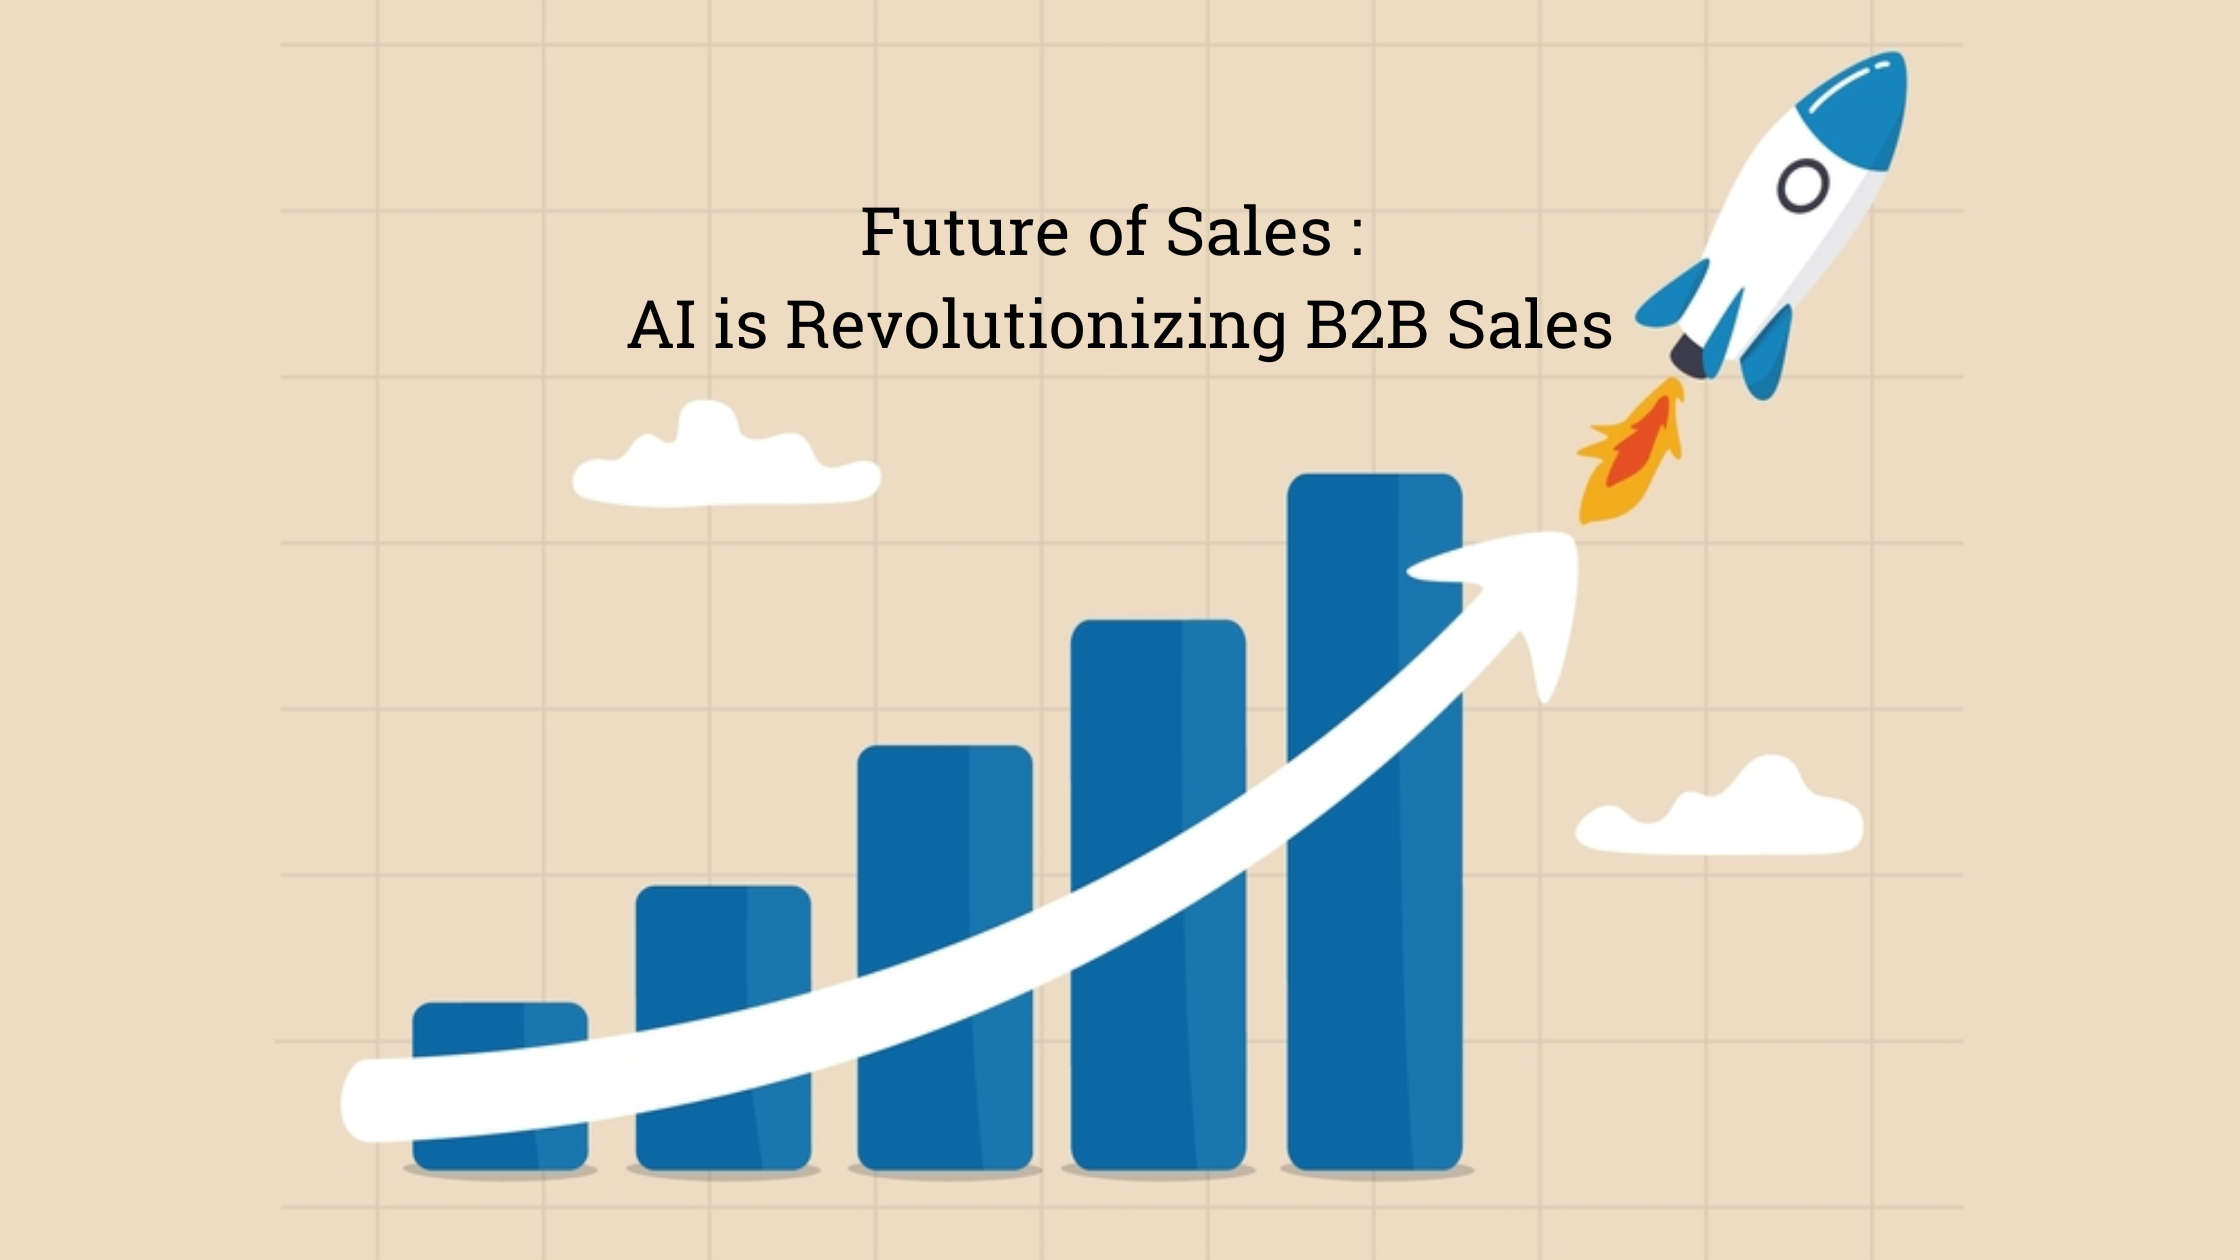 The Future of Sales: How AI is Revolutionizing B2B Sales